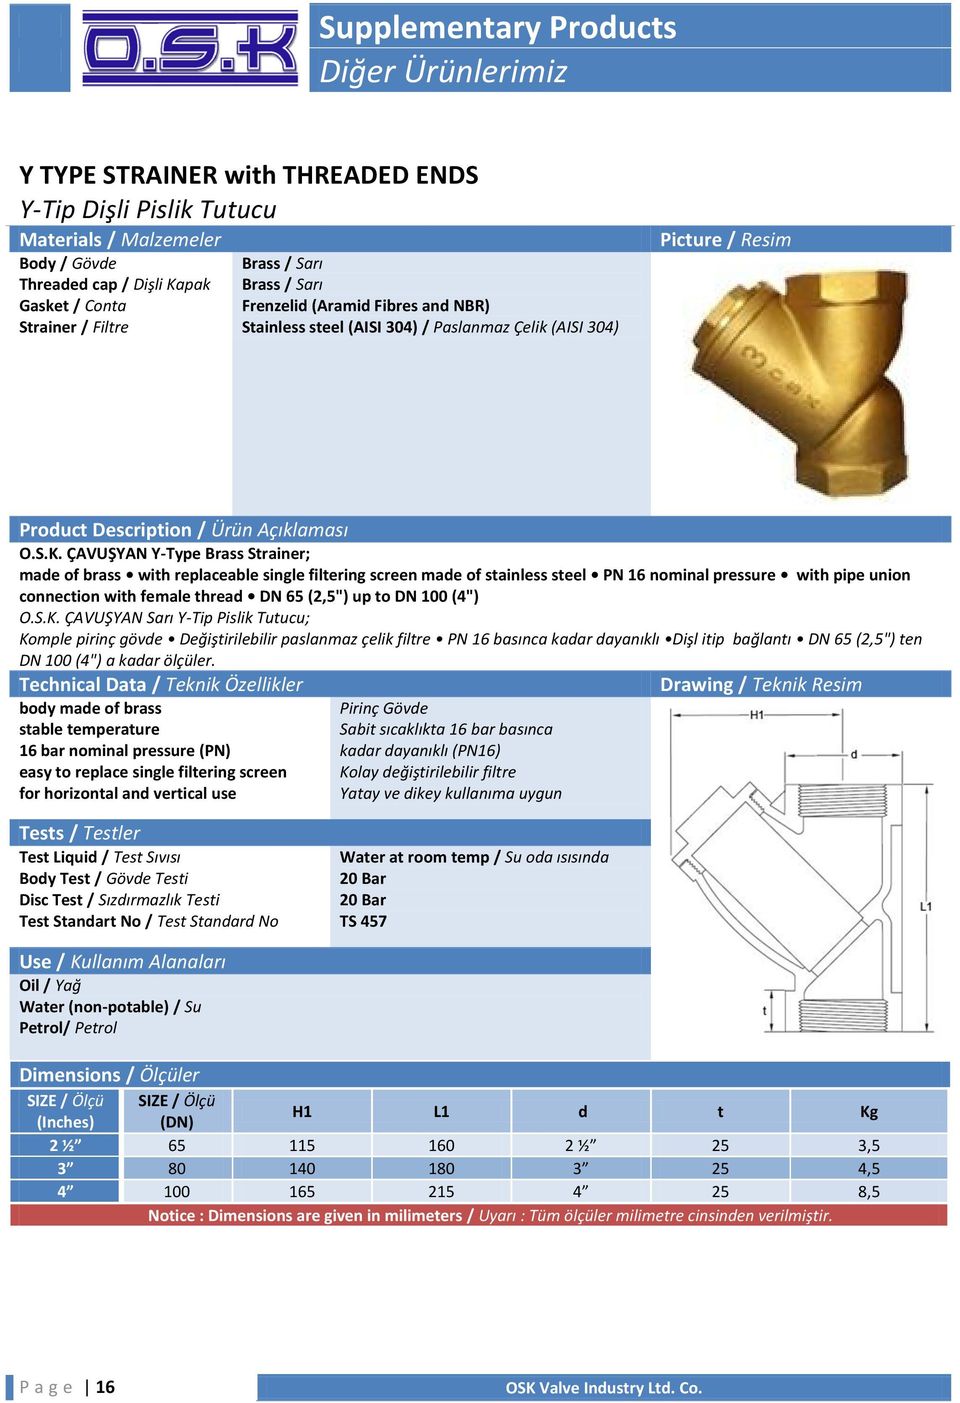 ÇAVUŞYAN Y-Type Brass Strainer; made of brass with replaceable single filtering screen made of stainless steel PN 16 nominal pressure with pipe union connection with female thread DN 65 (2,5") up to